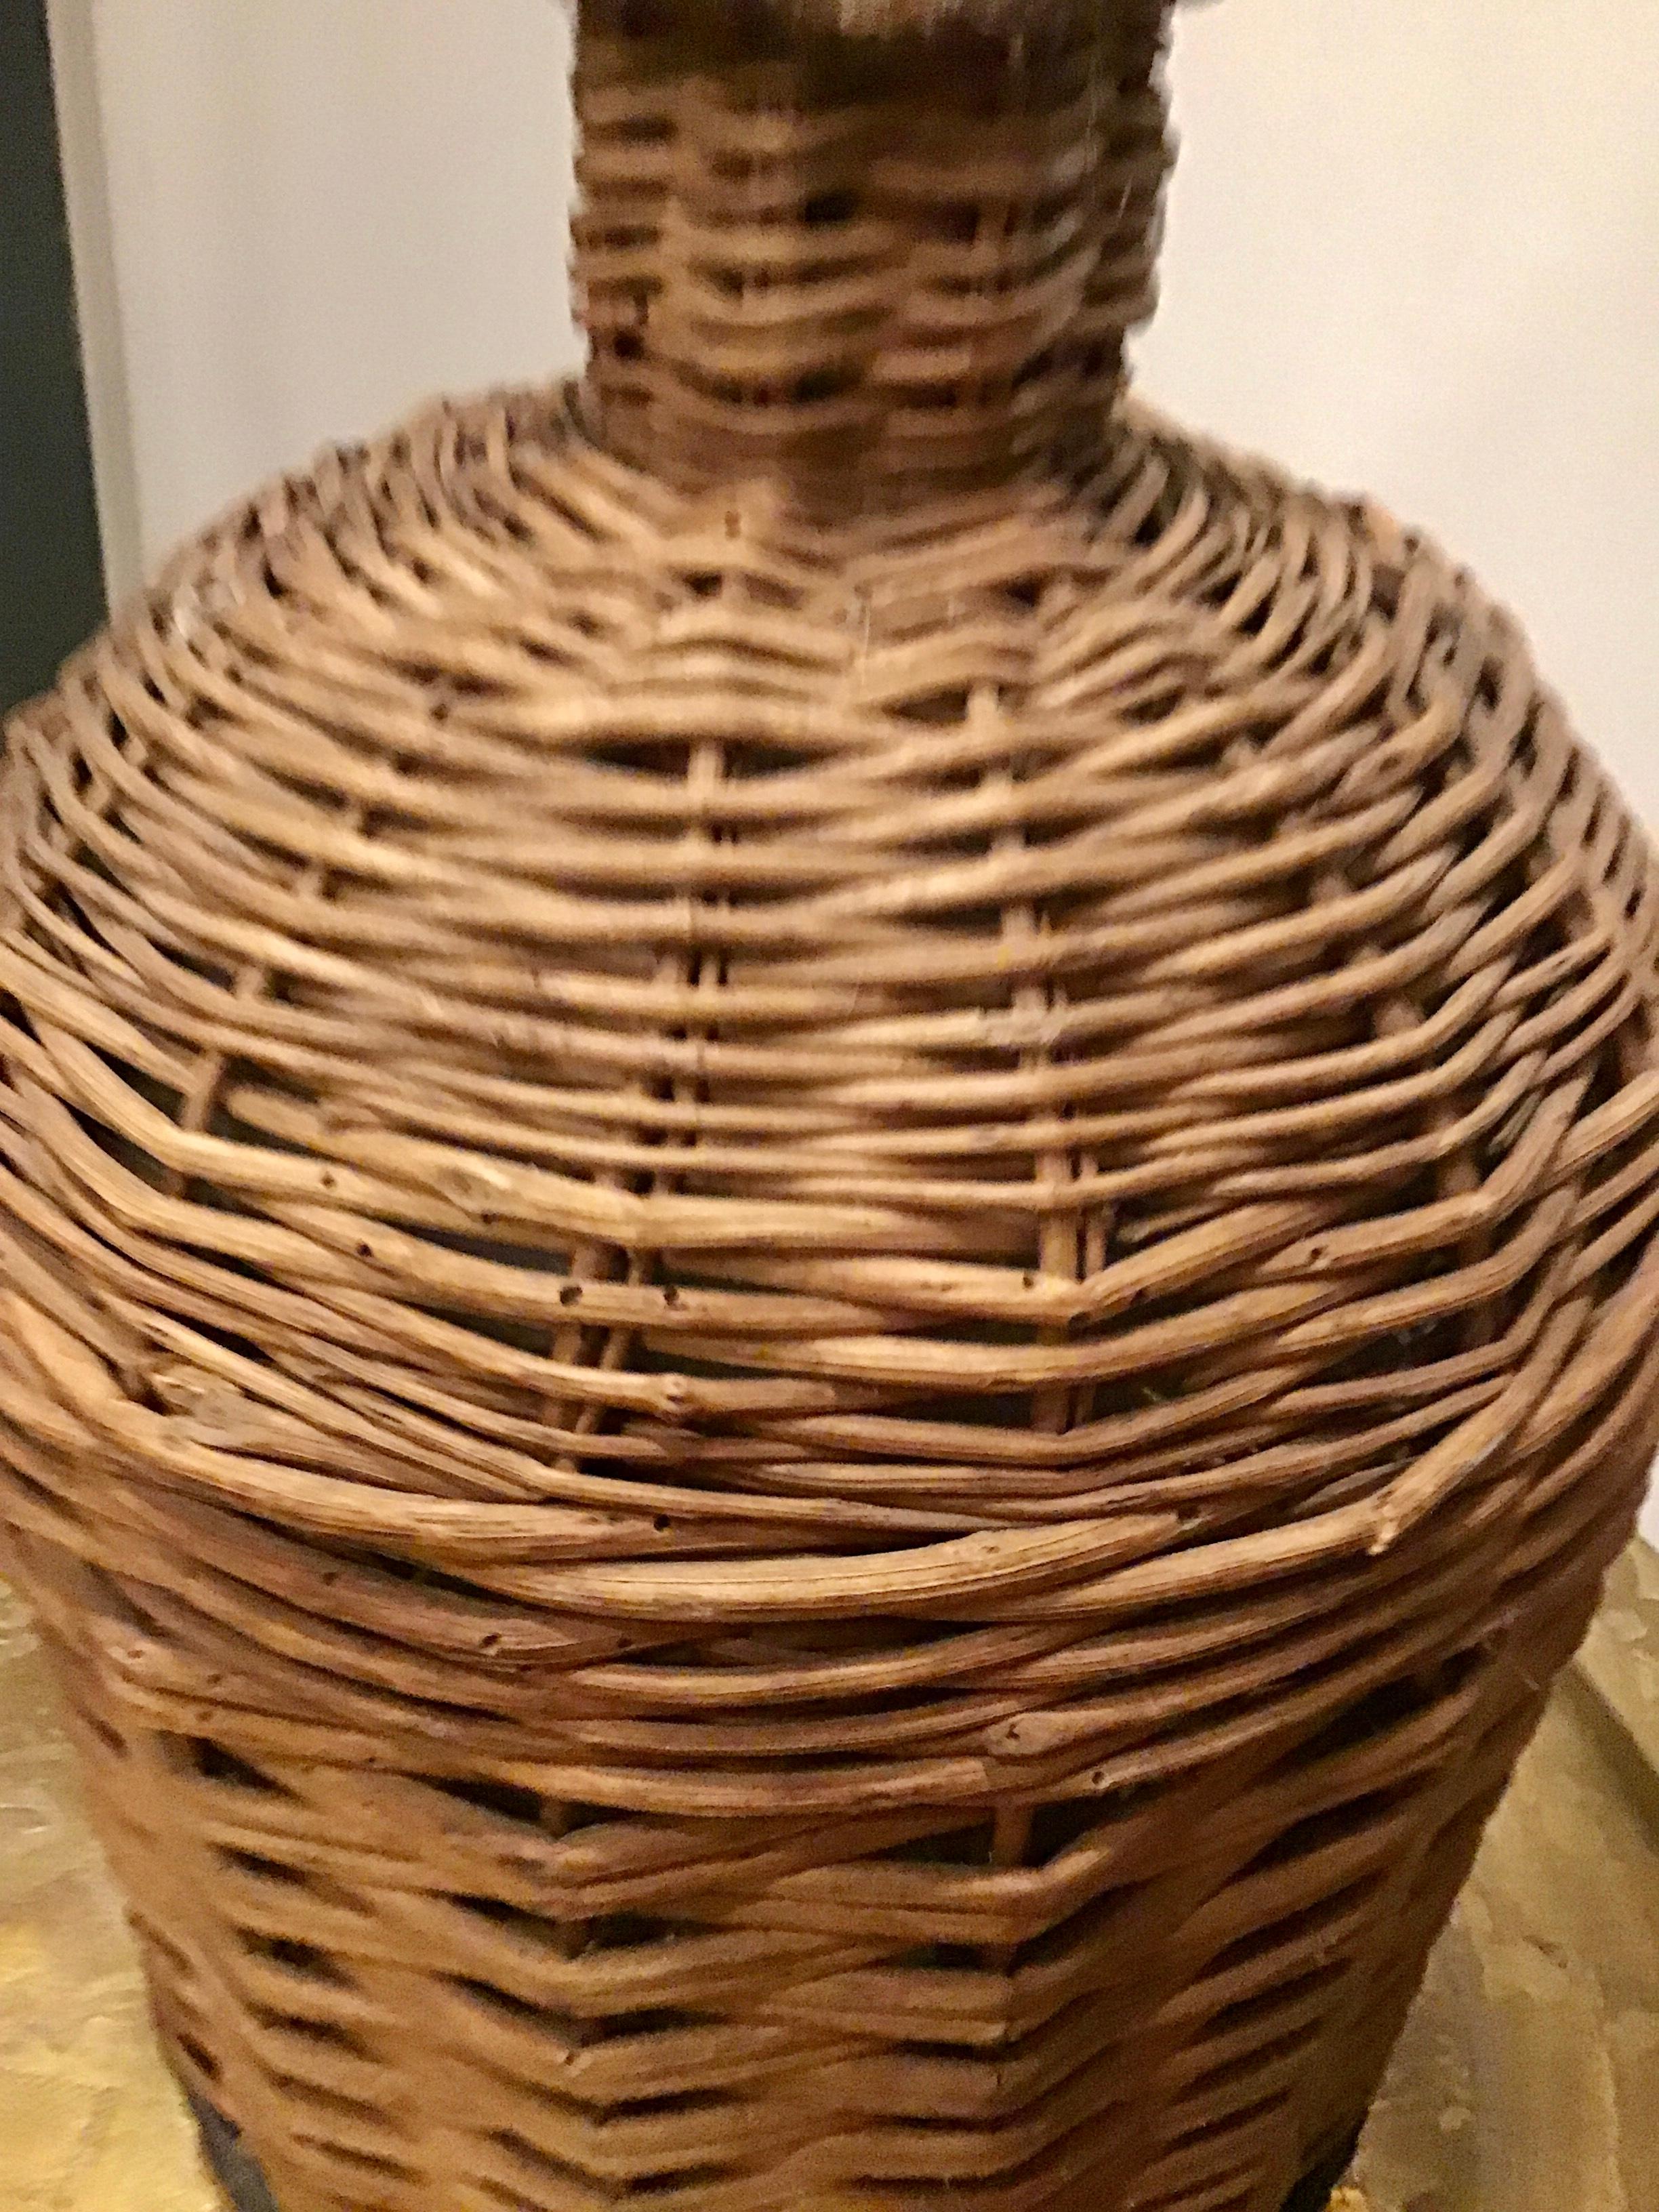 Decorative vintage European jug wrapped in wicker. This jug was once used to age wine.